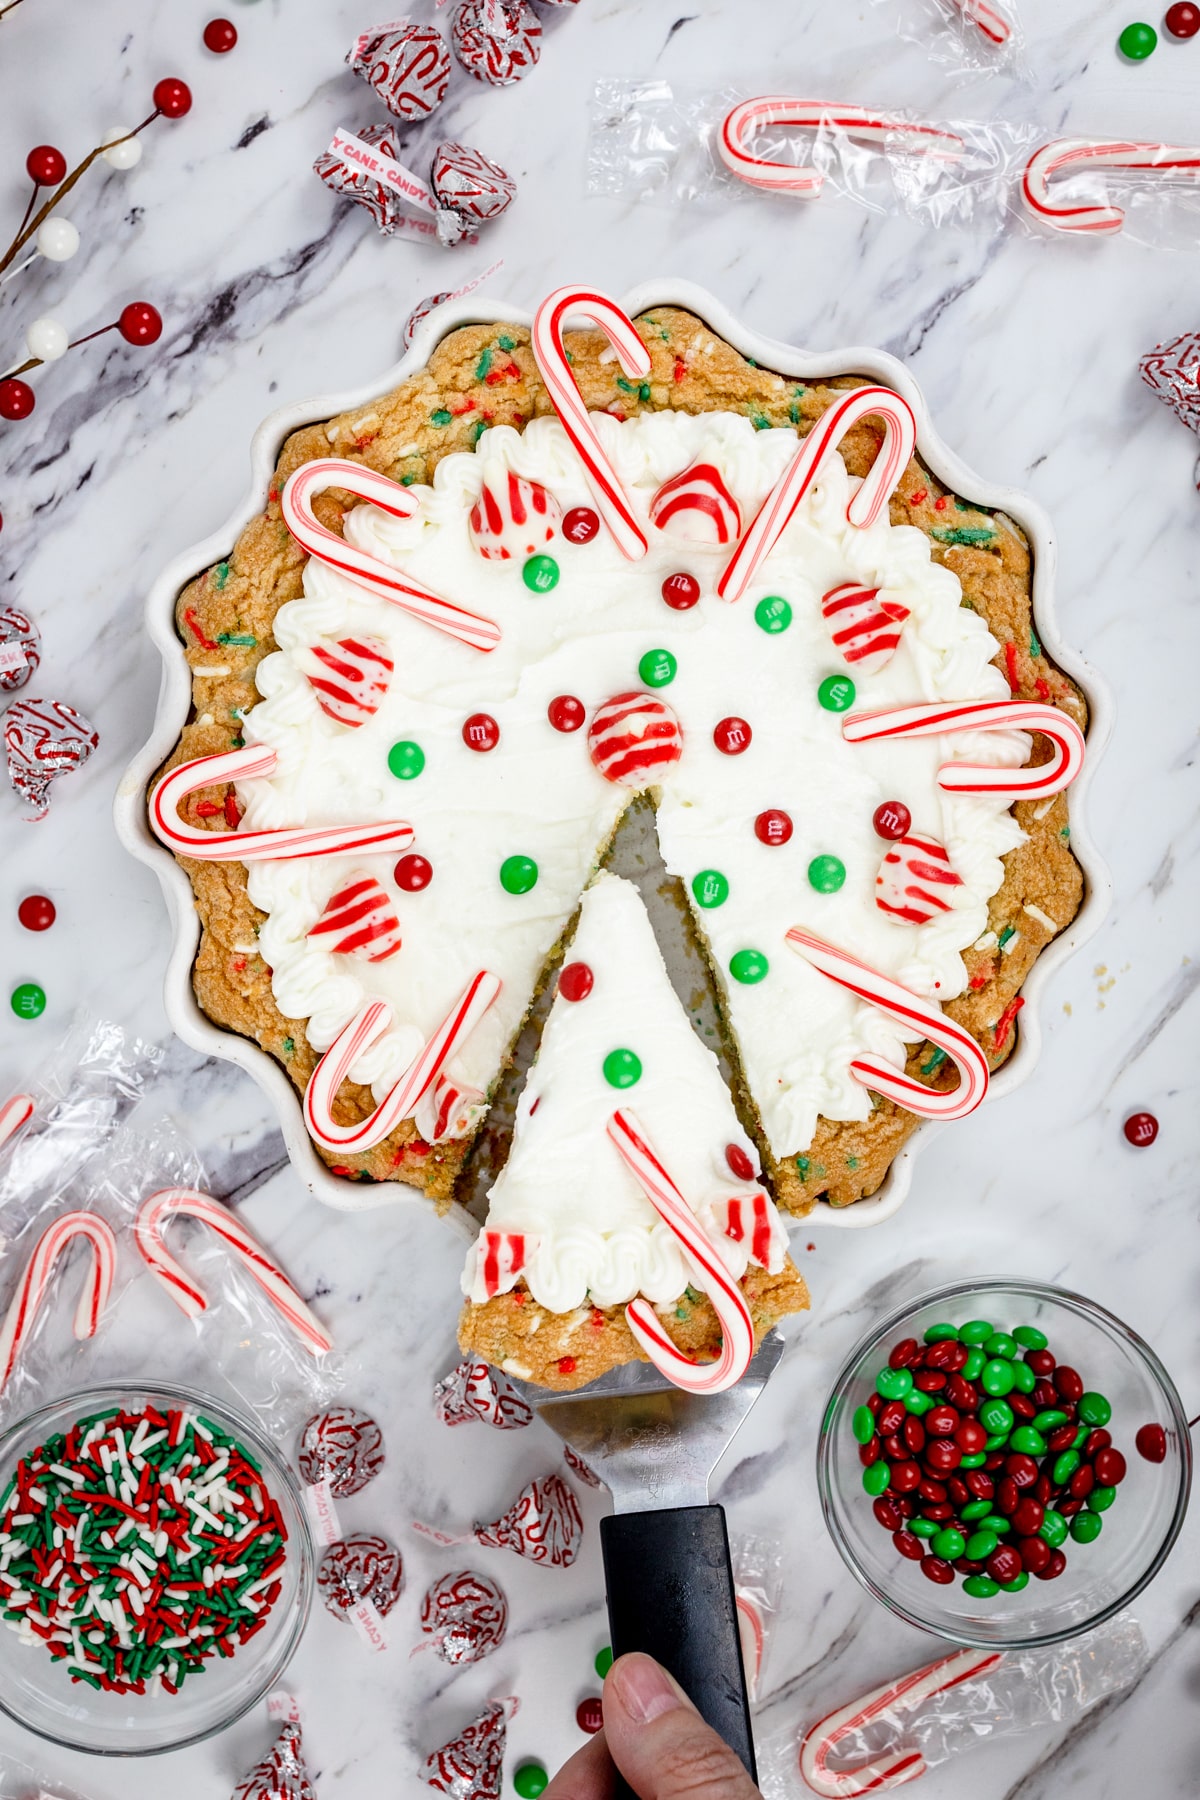 Top view of a Christmas sugar cookie pie with frosting and christmas candies on it with a slice cut out.